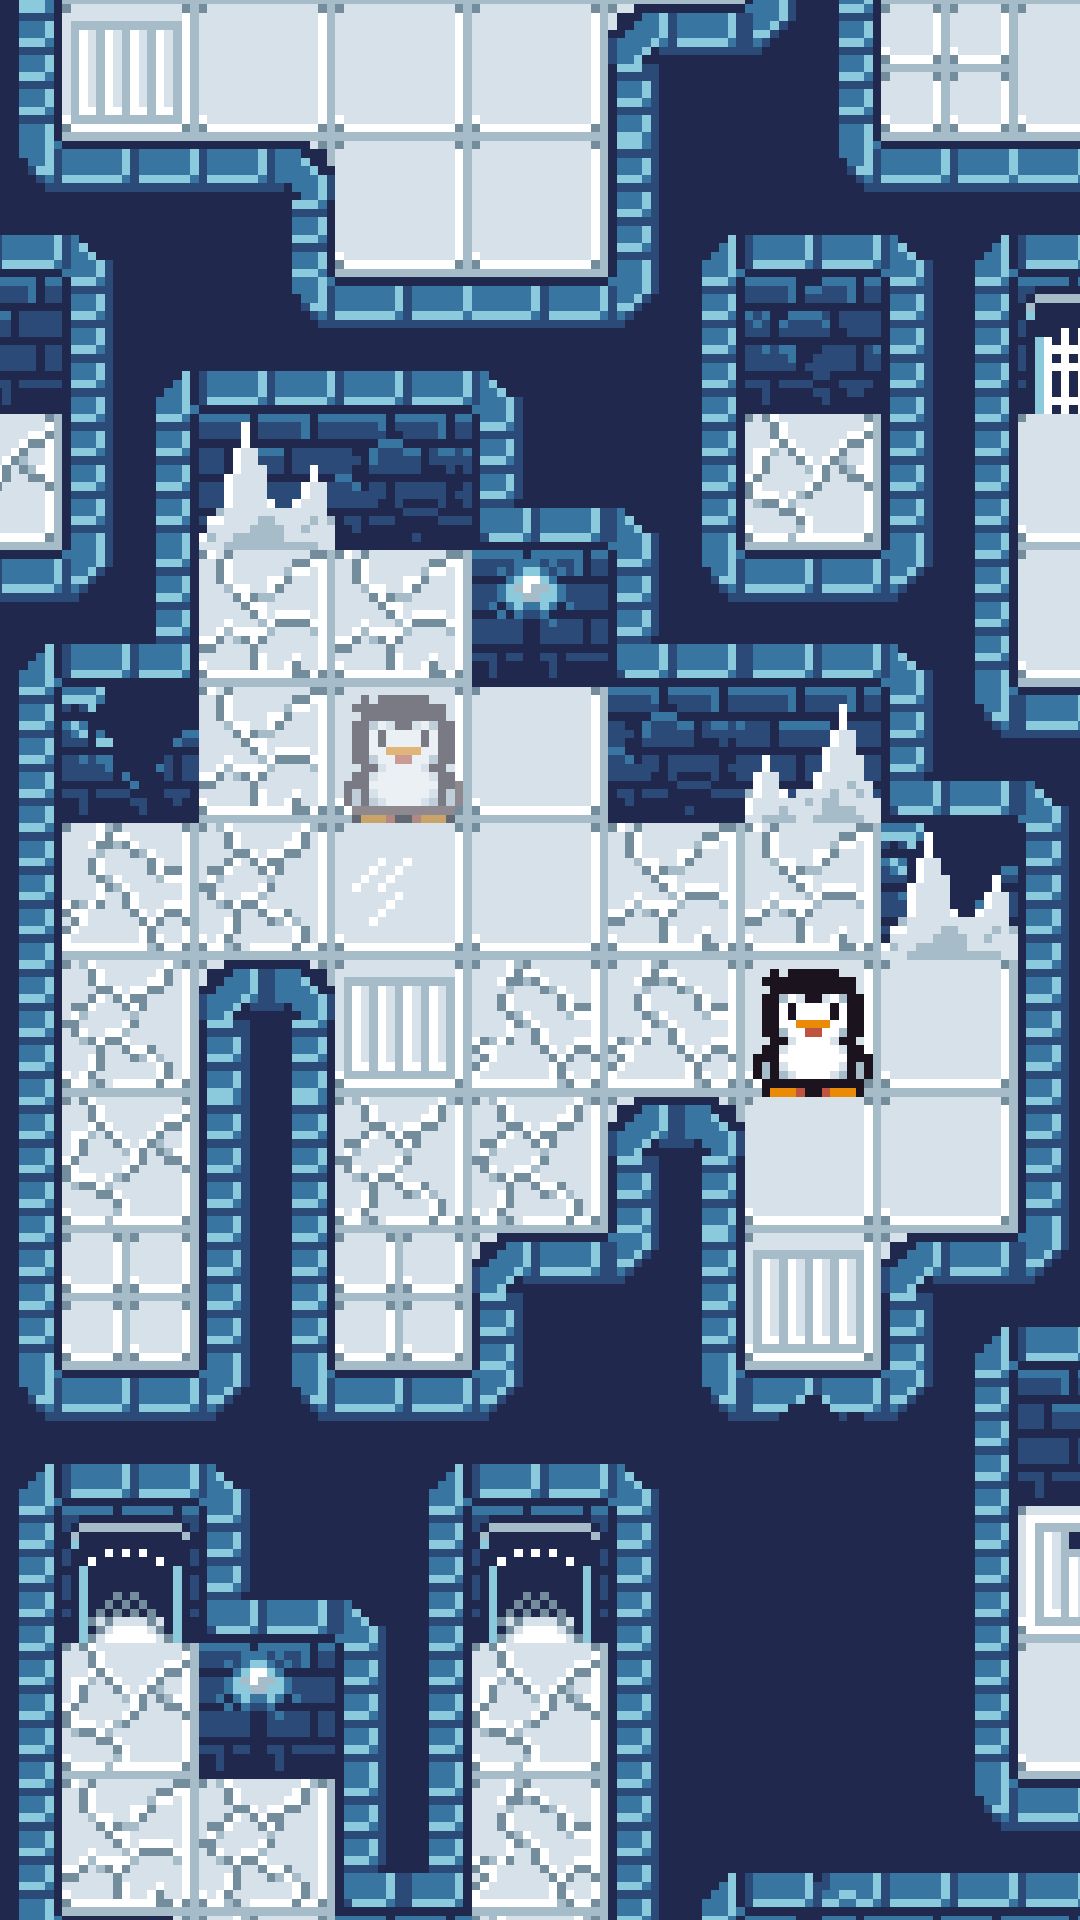 Frosty Fortress for Android